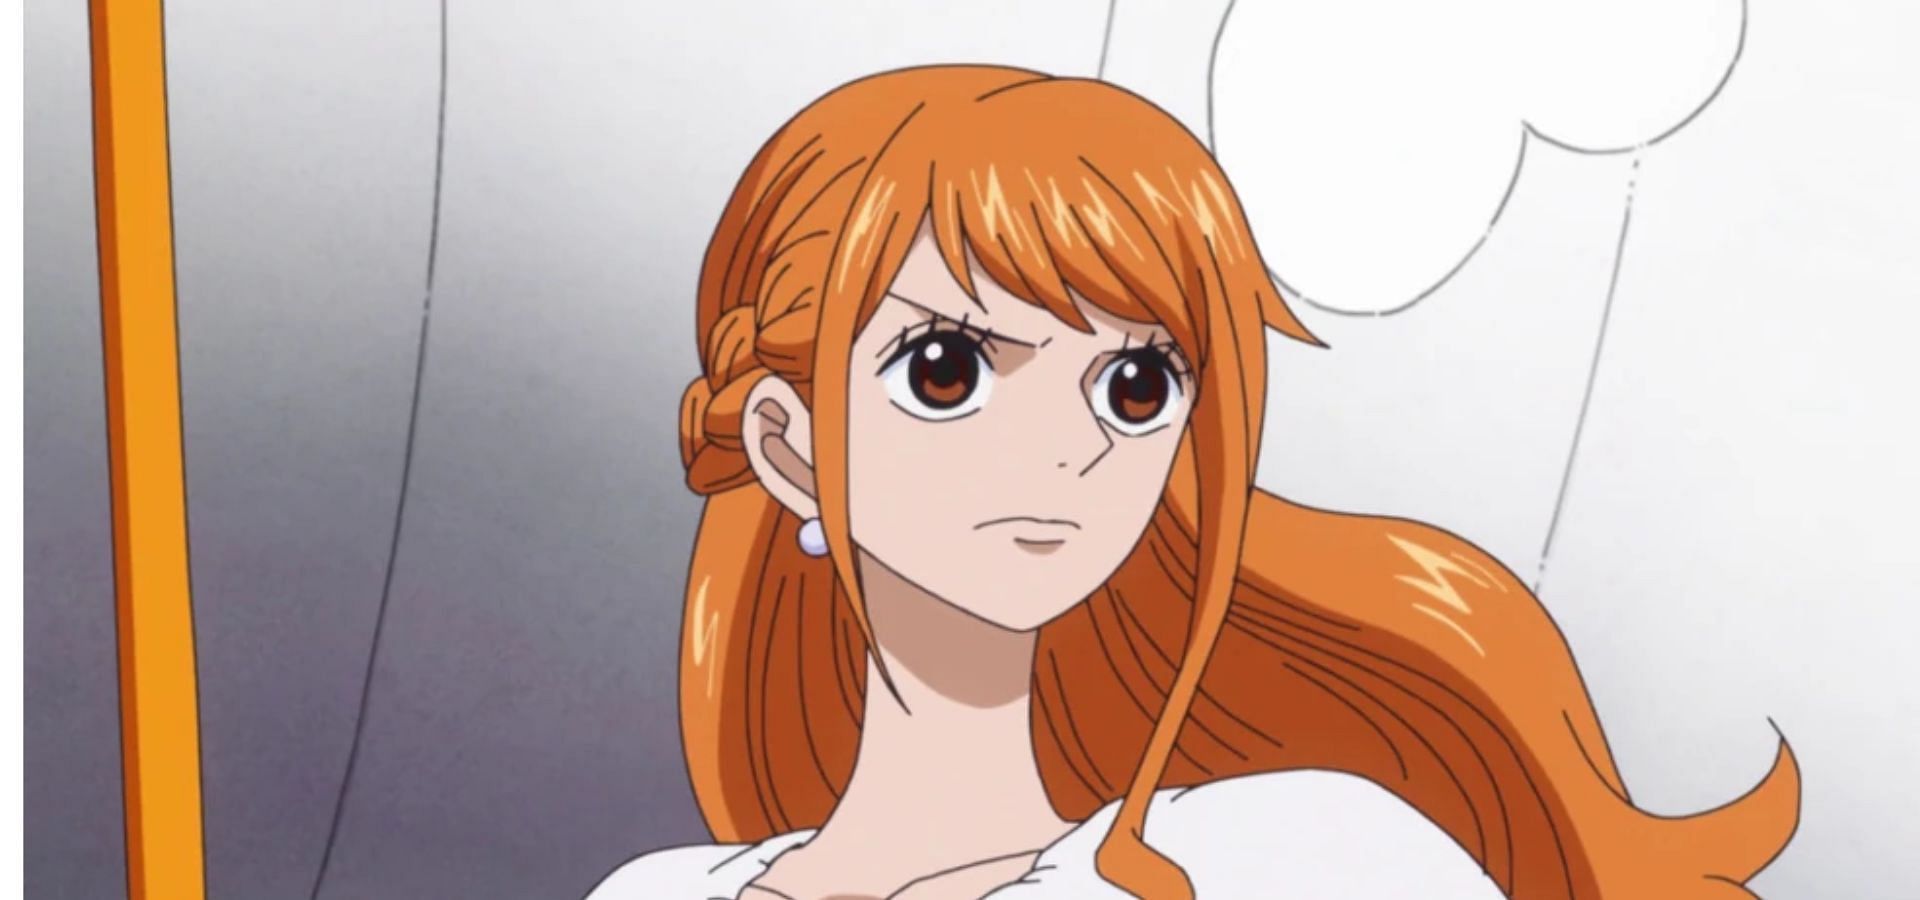 Nami from One Piece is one of the famous anime characters obsessed with money(image via Toei Animation)